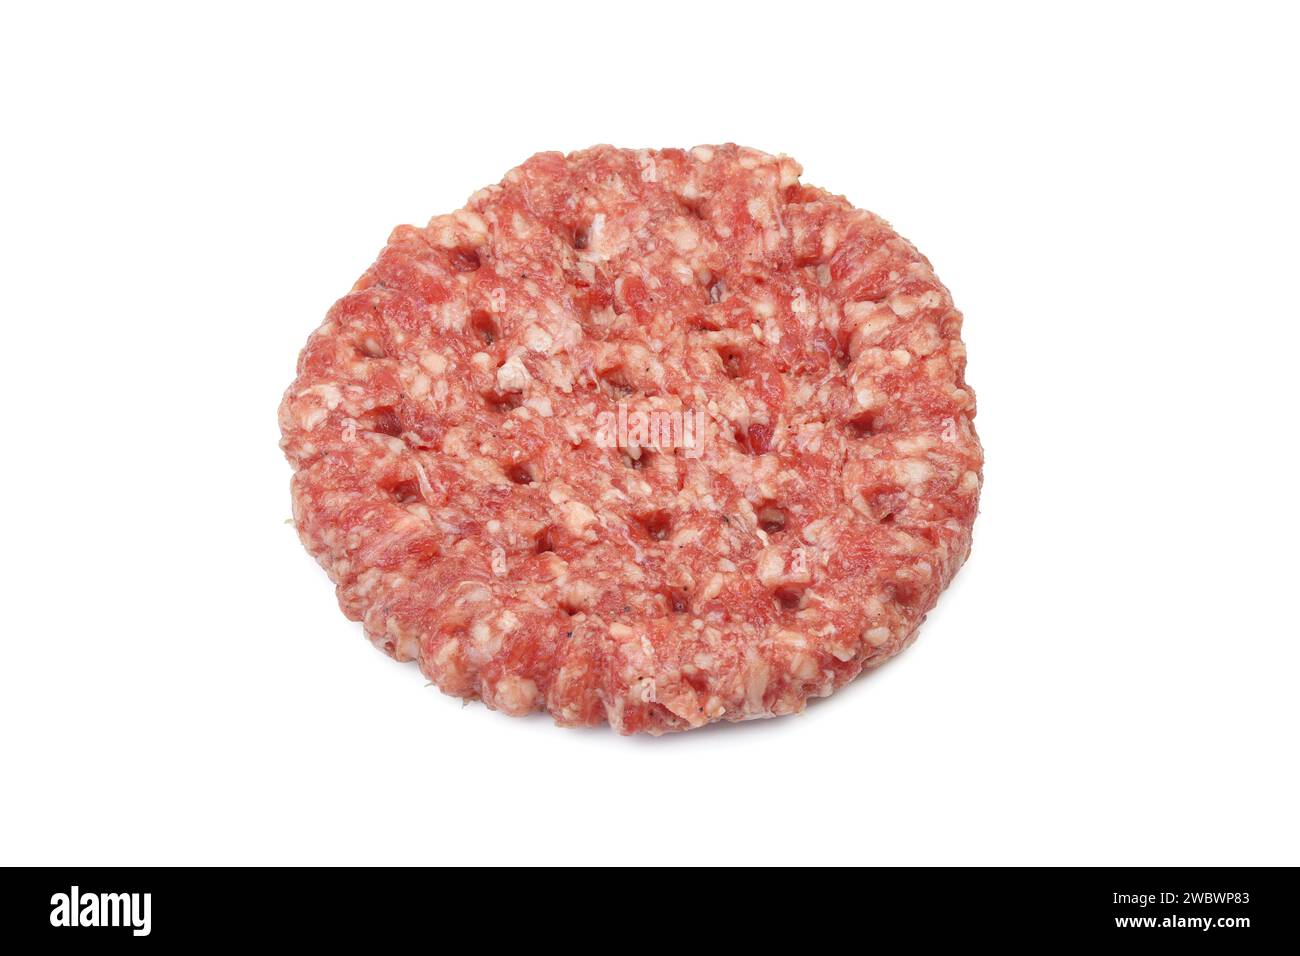 Single fresh beef patty isolated on white background. Minced burger meat Stock Photo